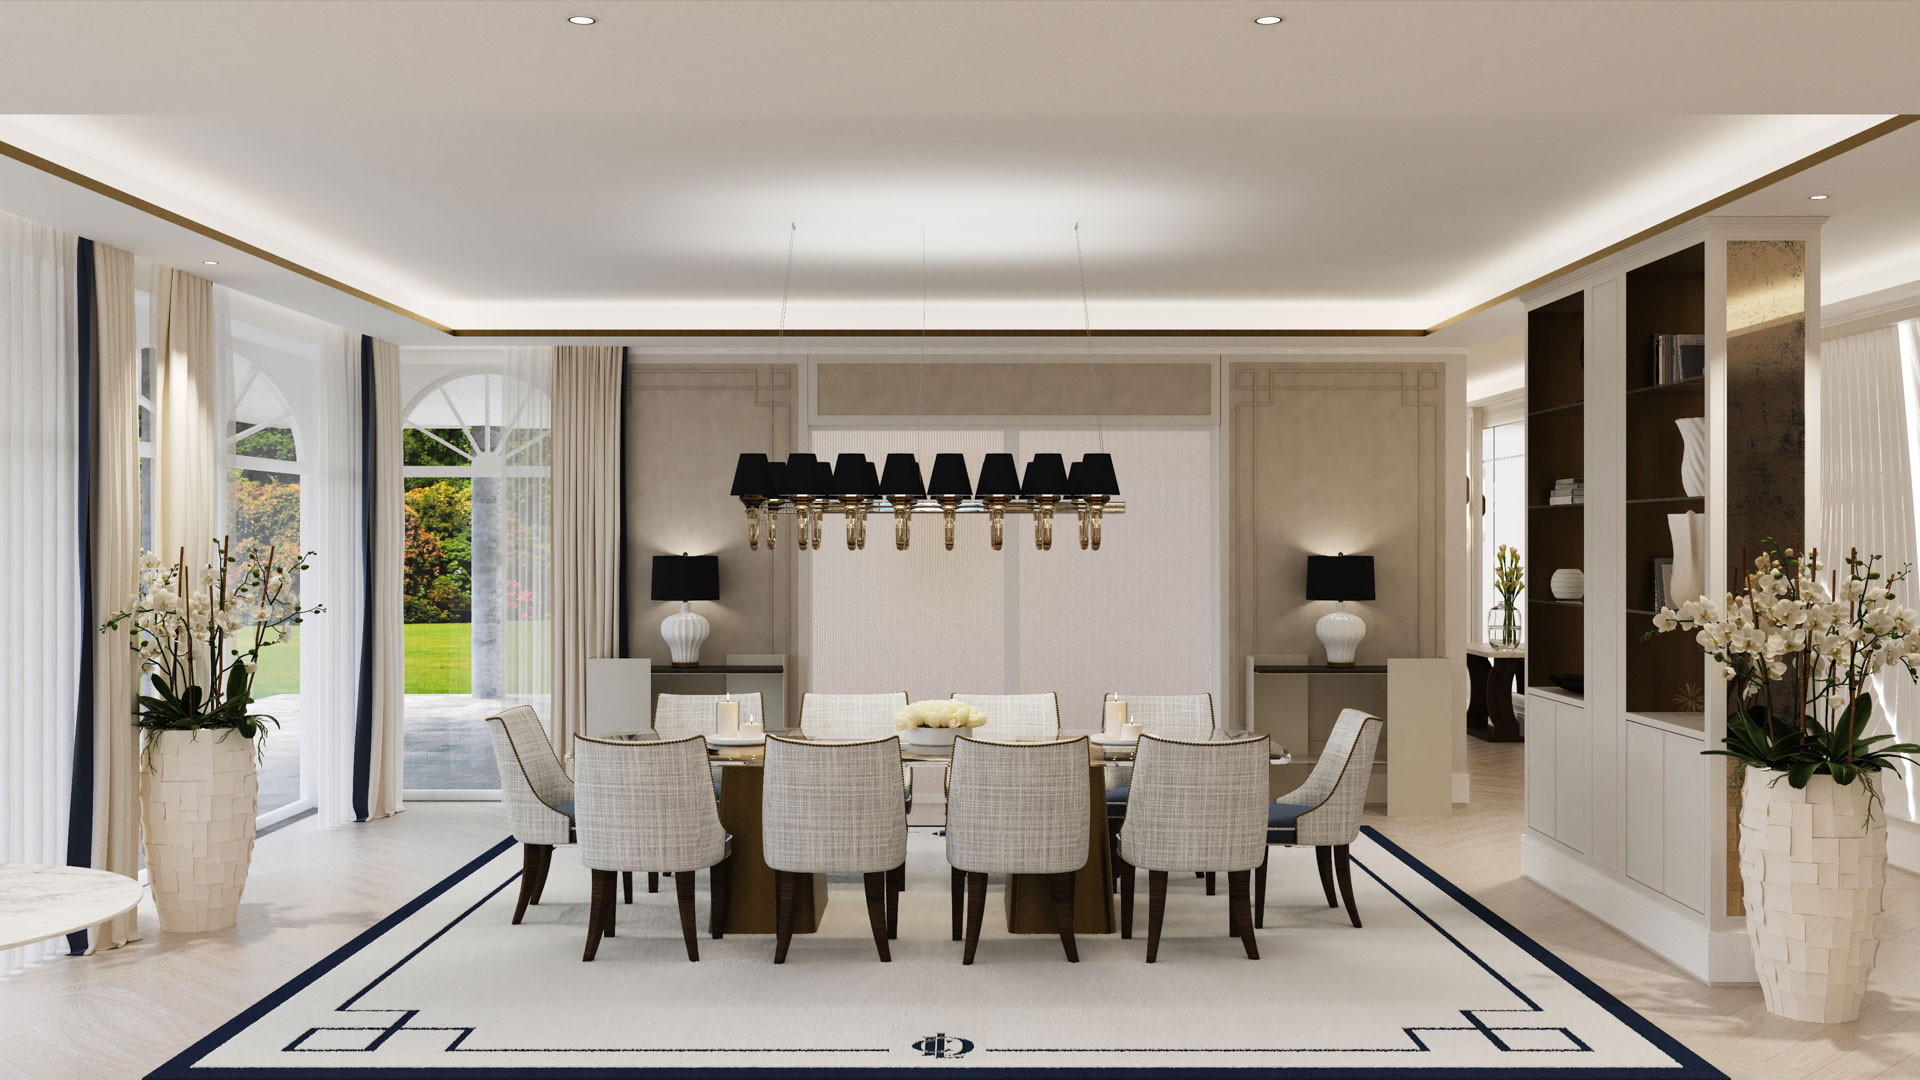 A formal dining room with a long table, upholstered chairs, elegant pendant lights, and large windows with garden views.